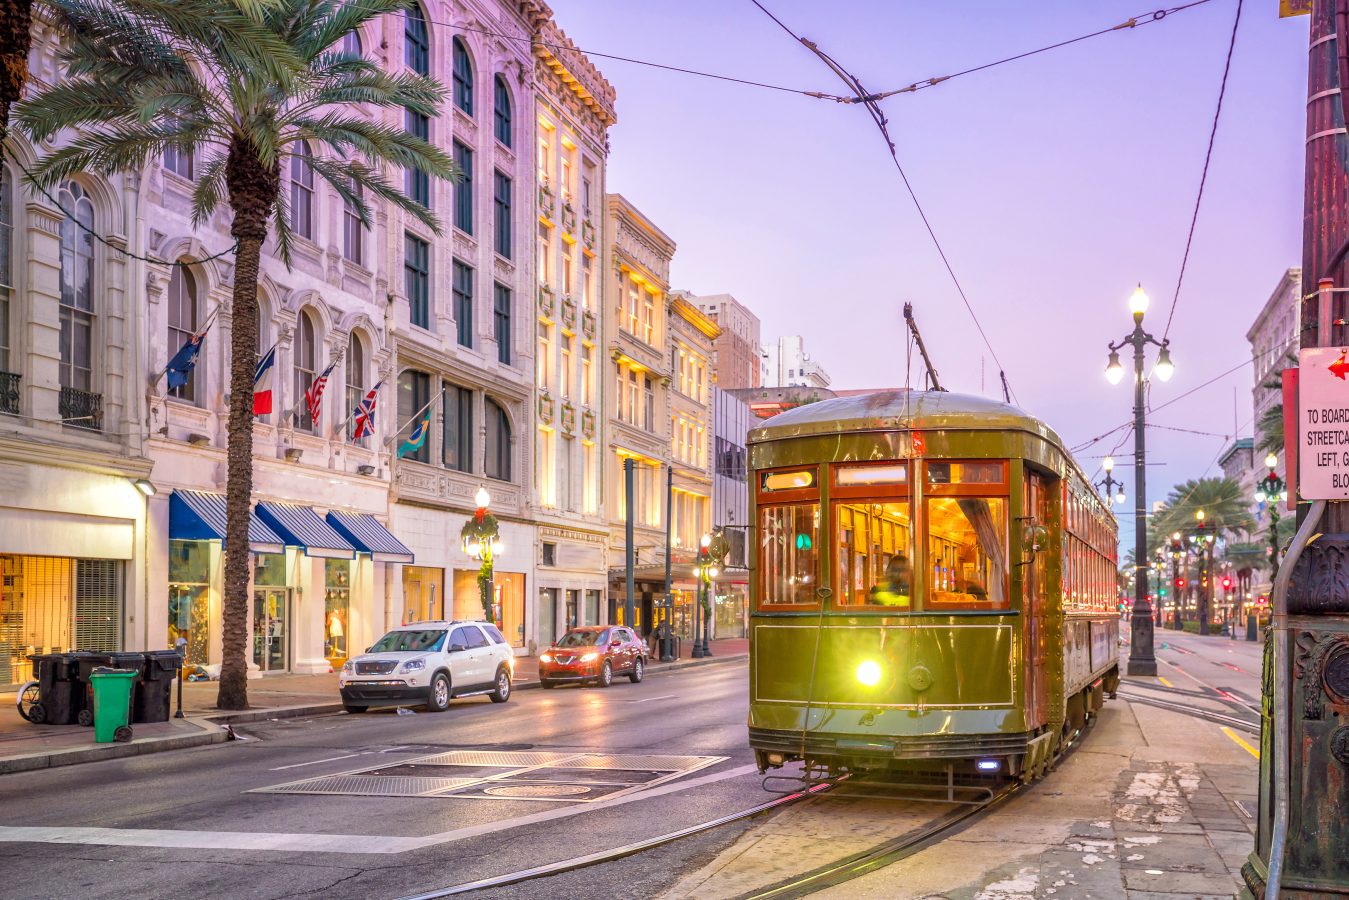 A streetcar going down the street in downtown New Orleans, USA at twilight.